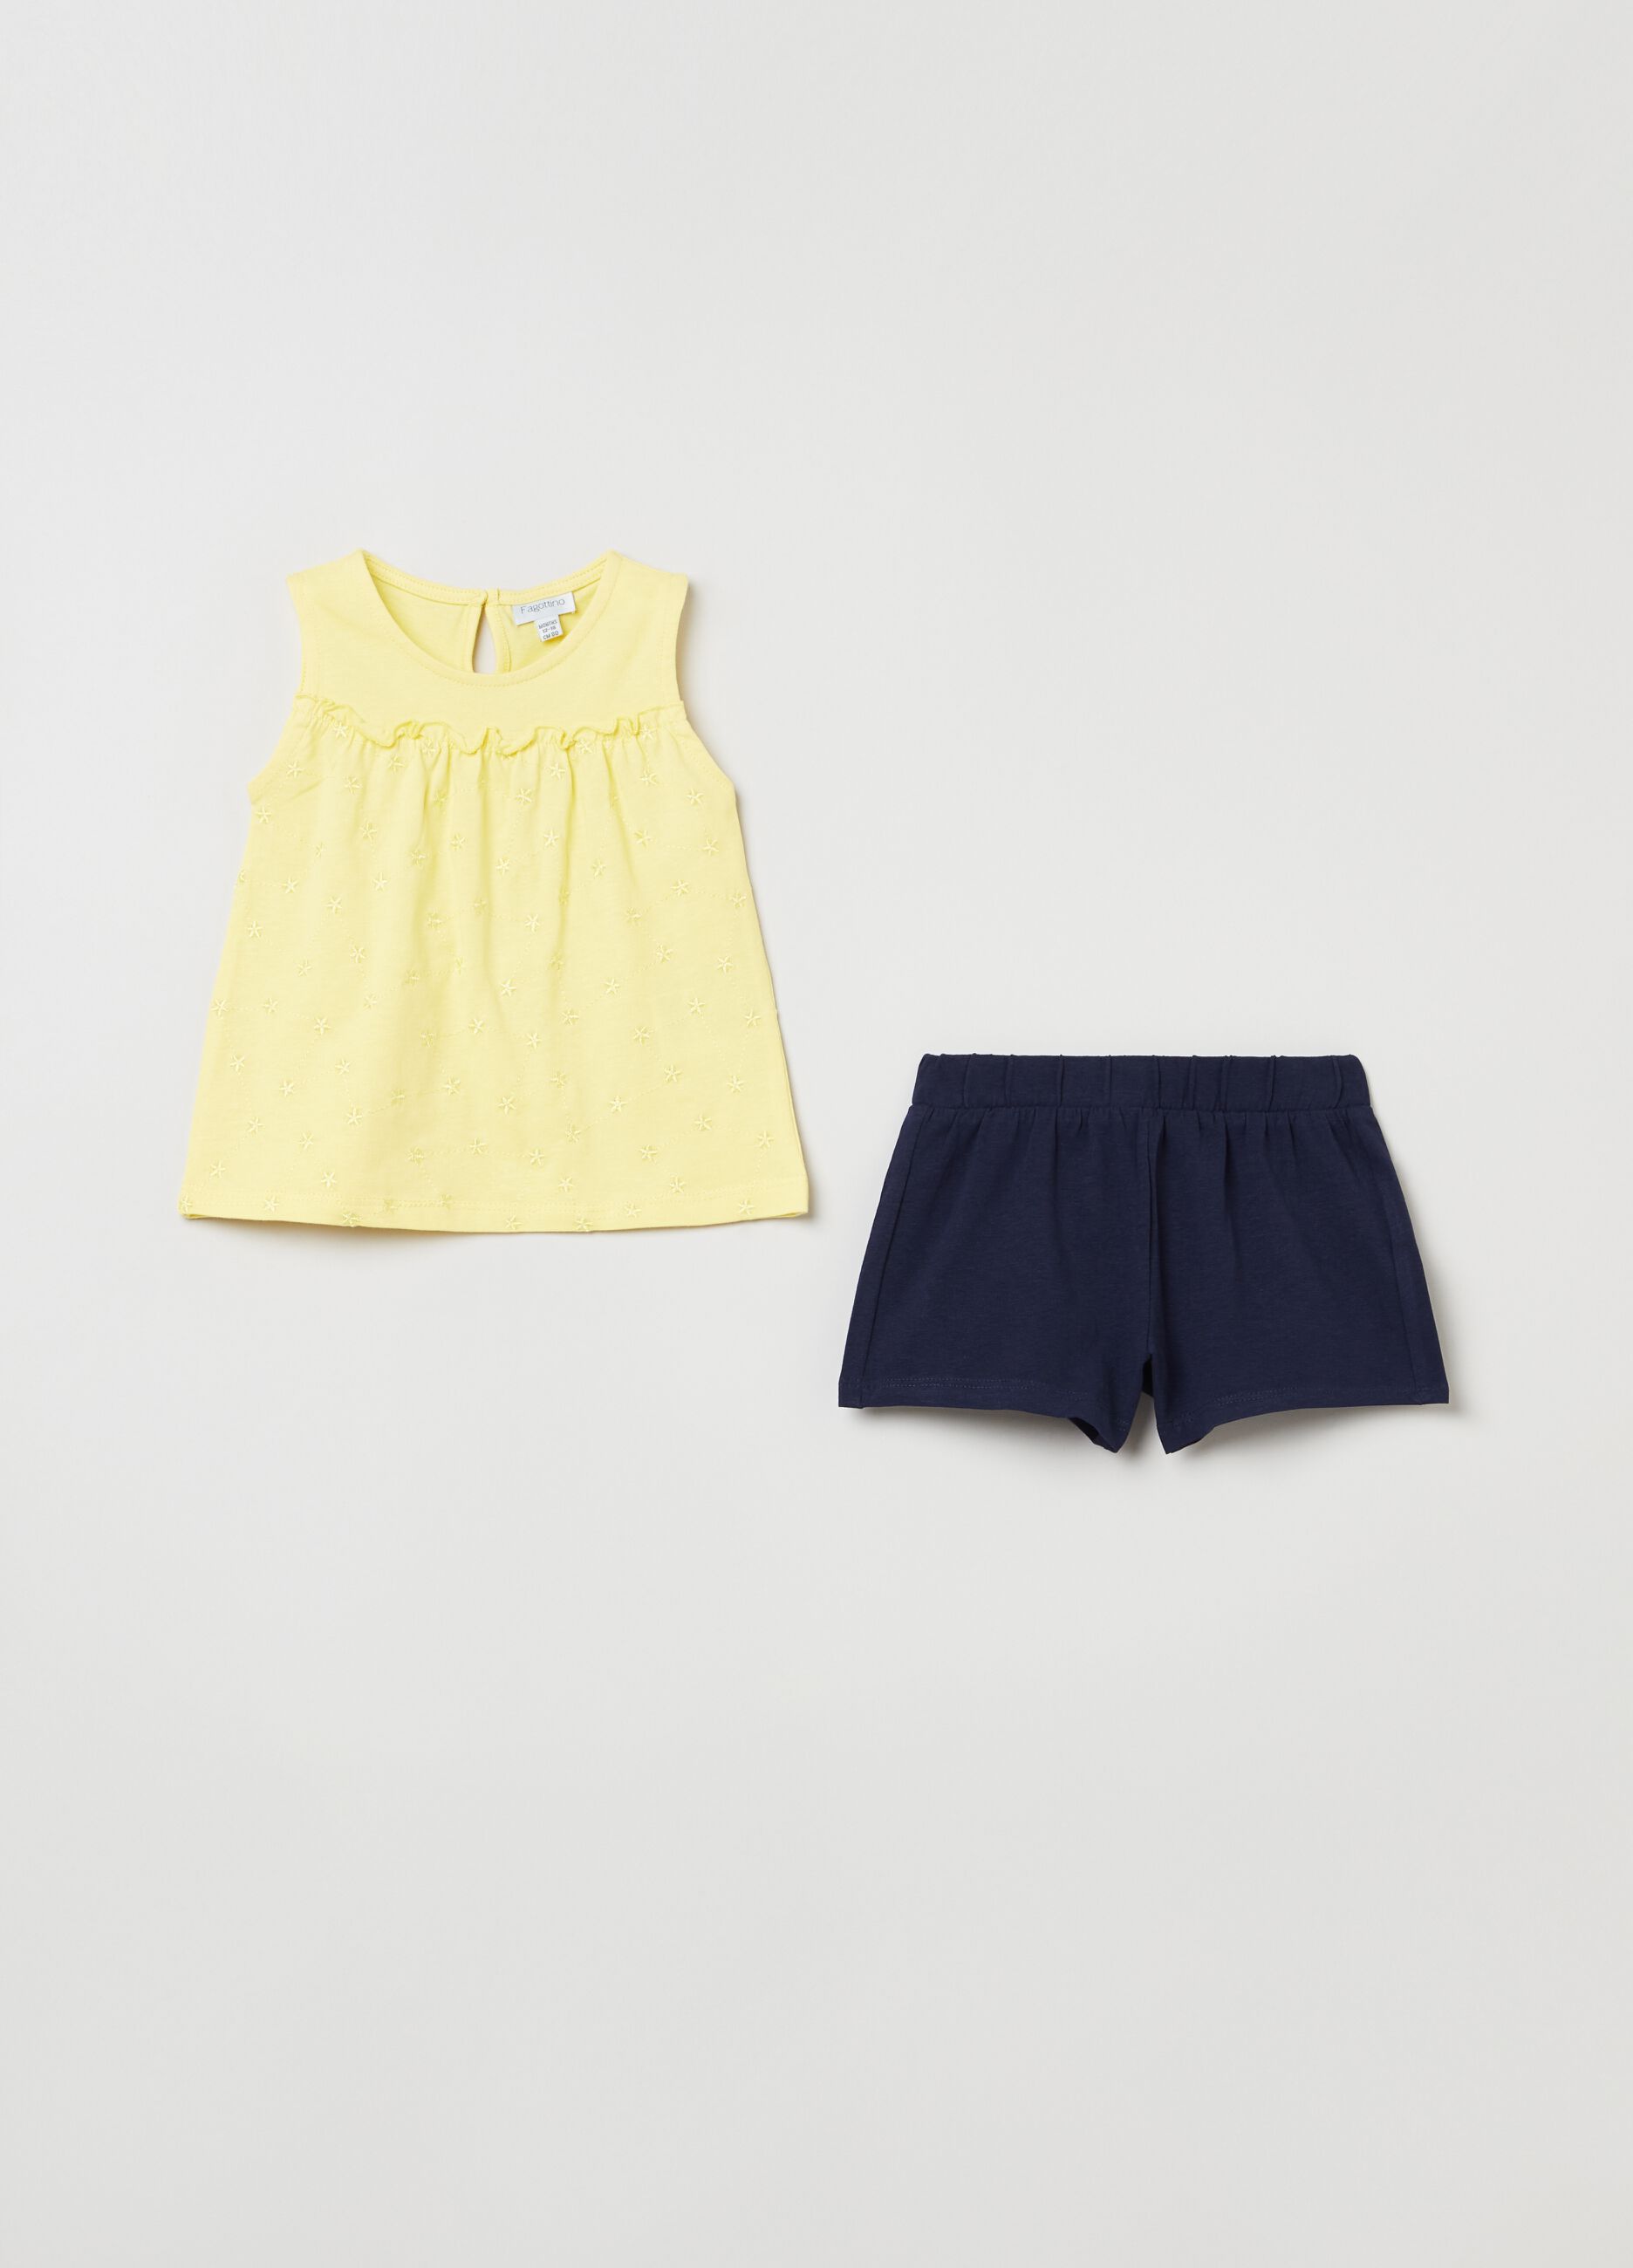 Jogging set consisting of tank top with embroidery and shorts